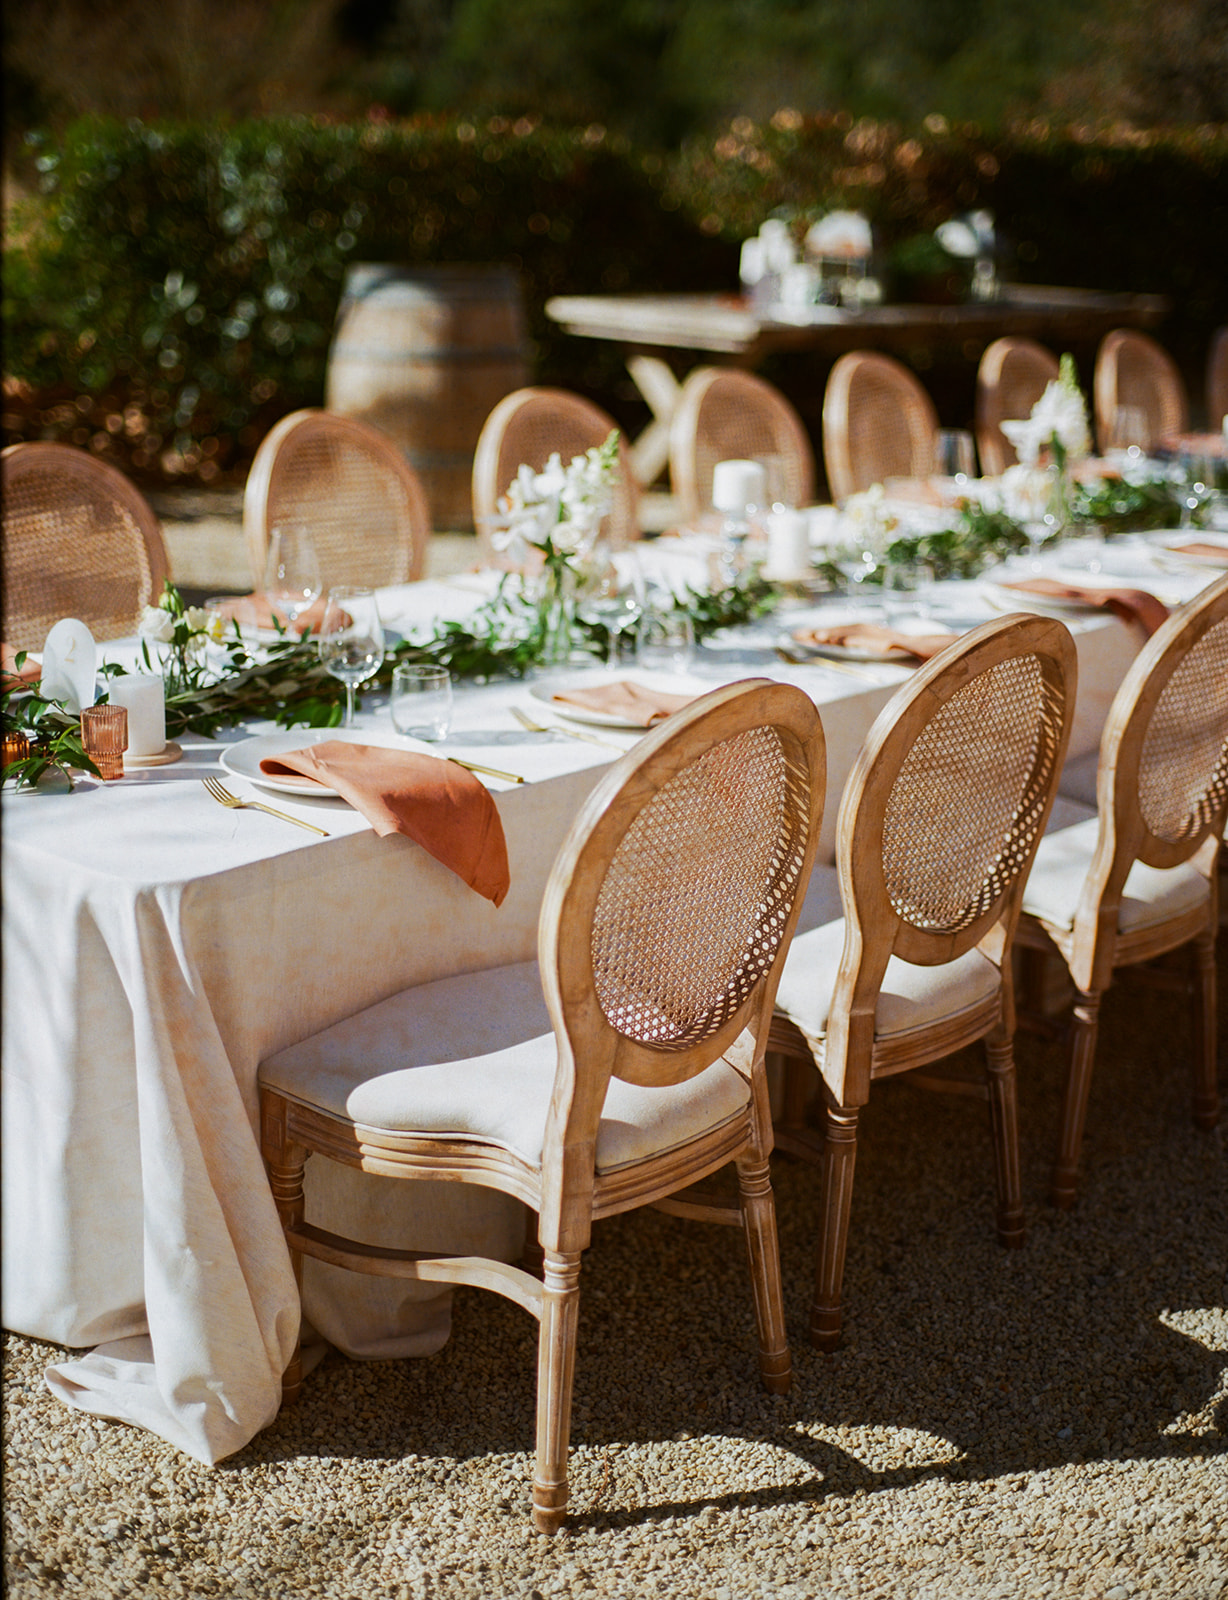 Redleaf wedding table details styled by Event artists